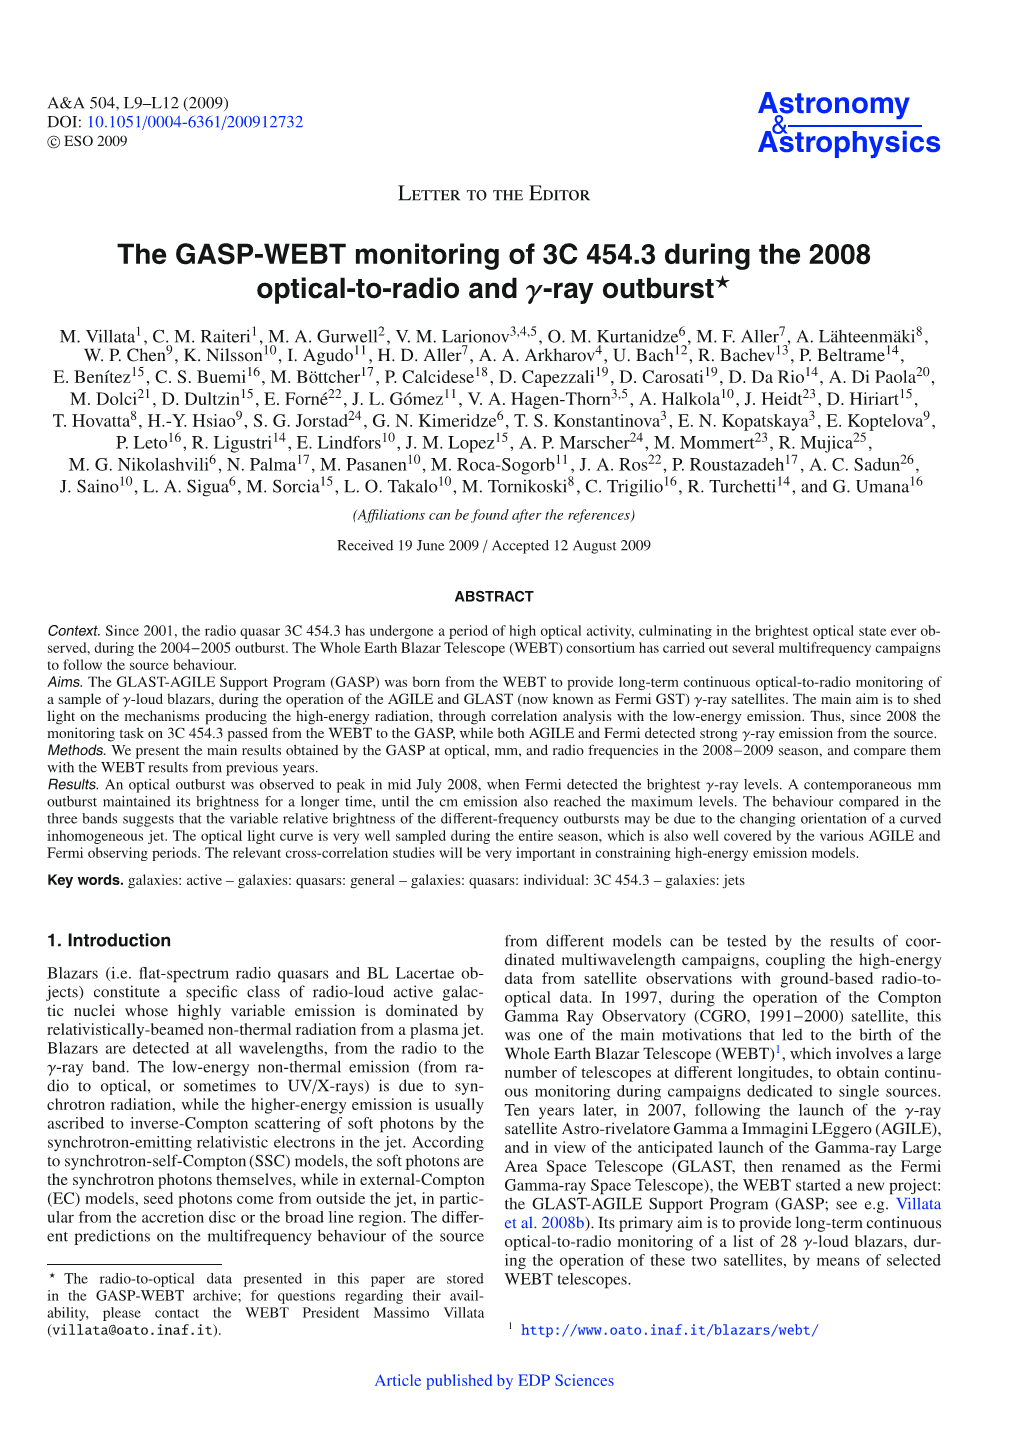 The GASP-WEBT Monitoring of 3C 454.3 During the 2008 Optical-To-Radio and Γ-Ray Outburst